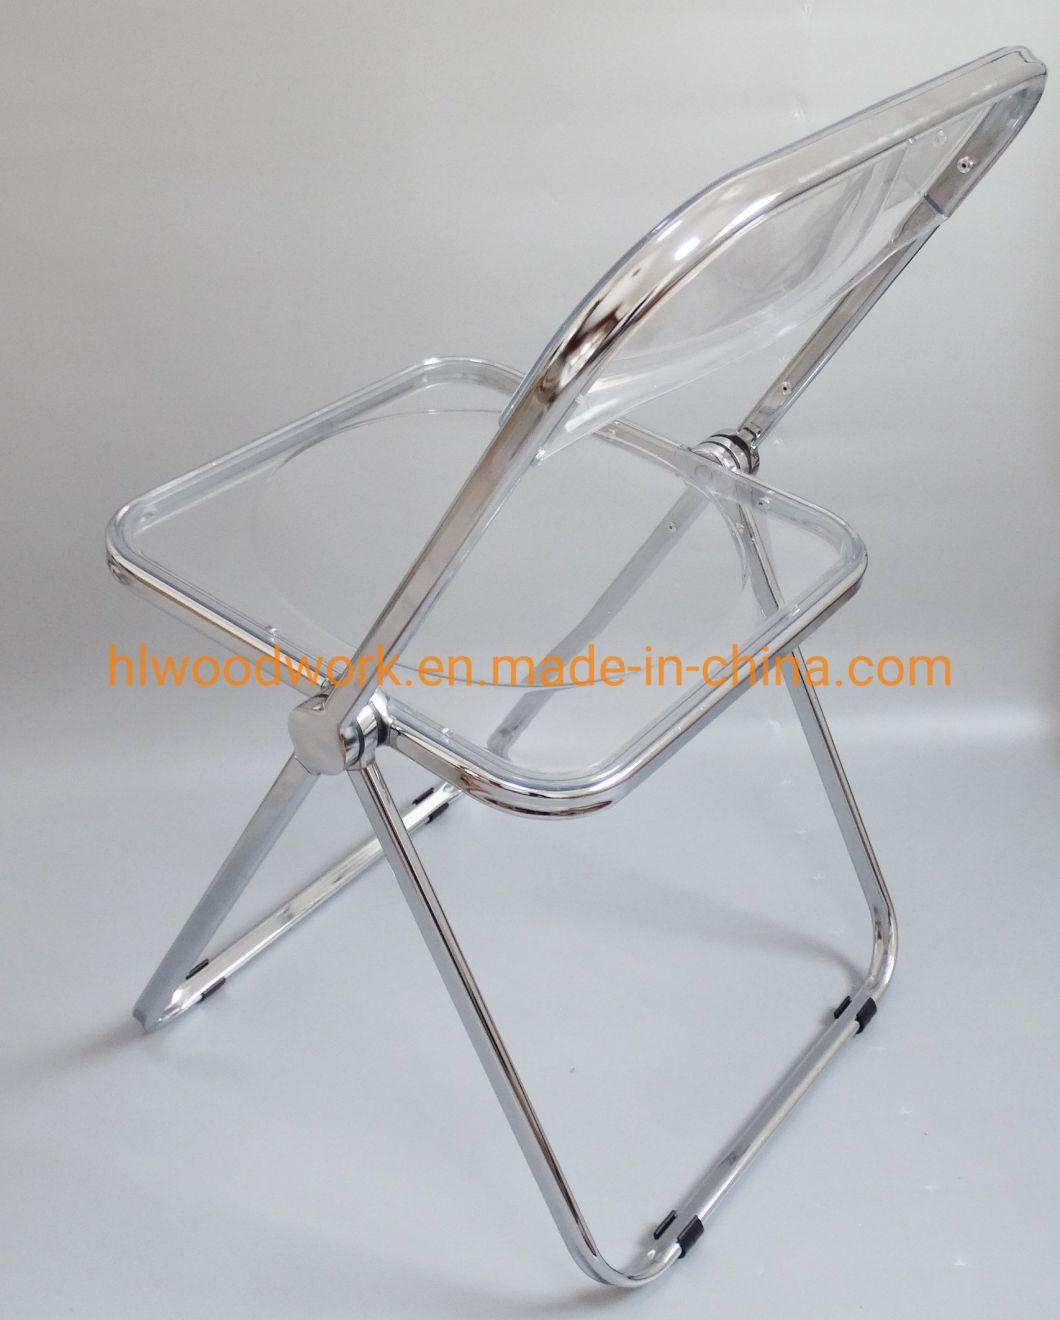 Modern Transparent Grey Folding Chair PC Plastic Hotel Chairt Chrome Frame Office Bar Dining Leisure Banquet Wedding Meeting Chair Plastic Dining Chair